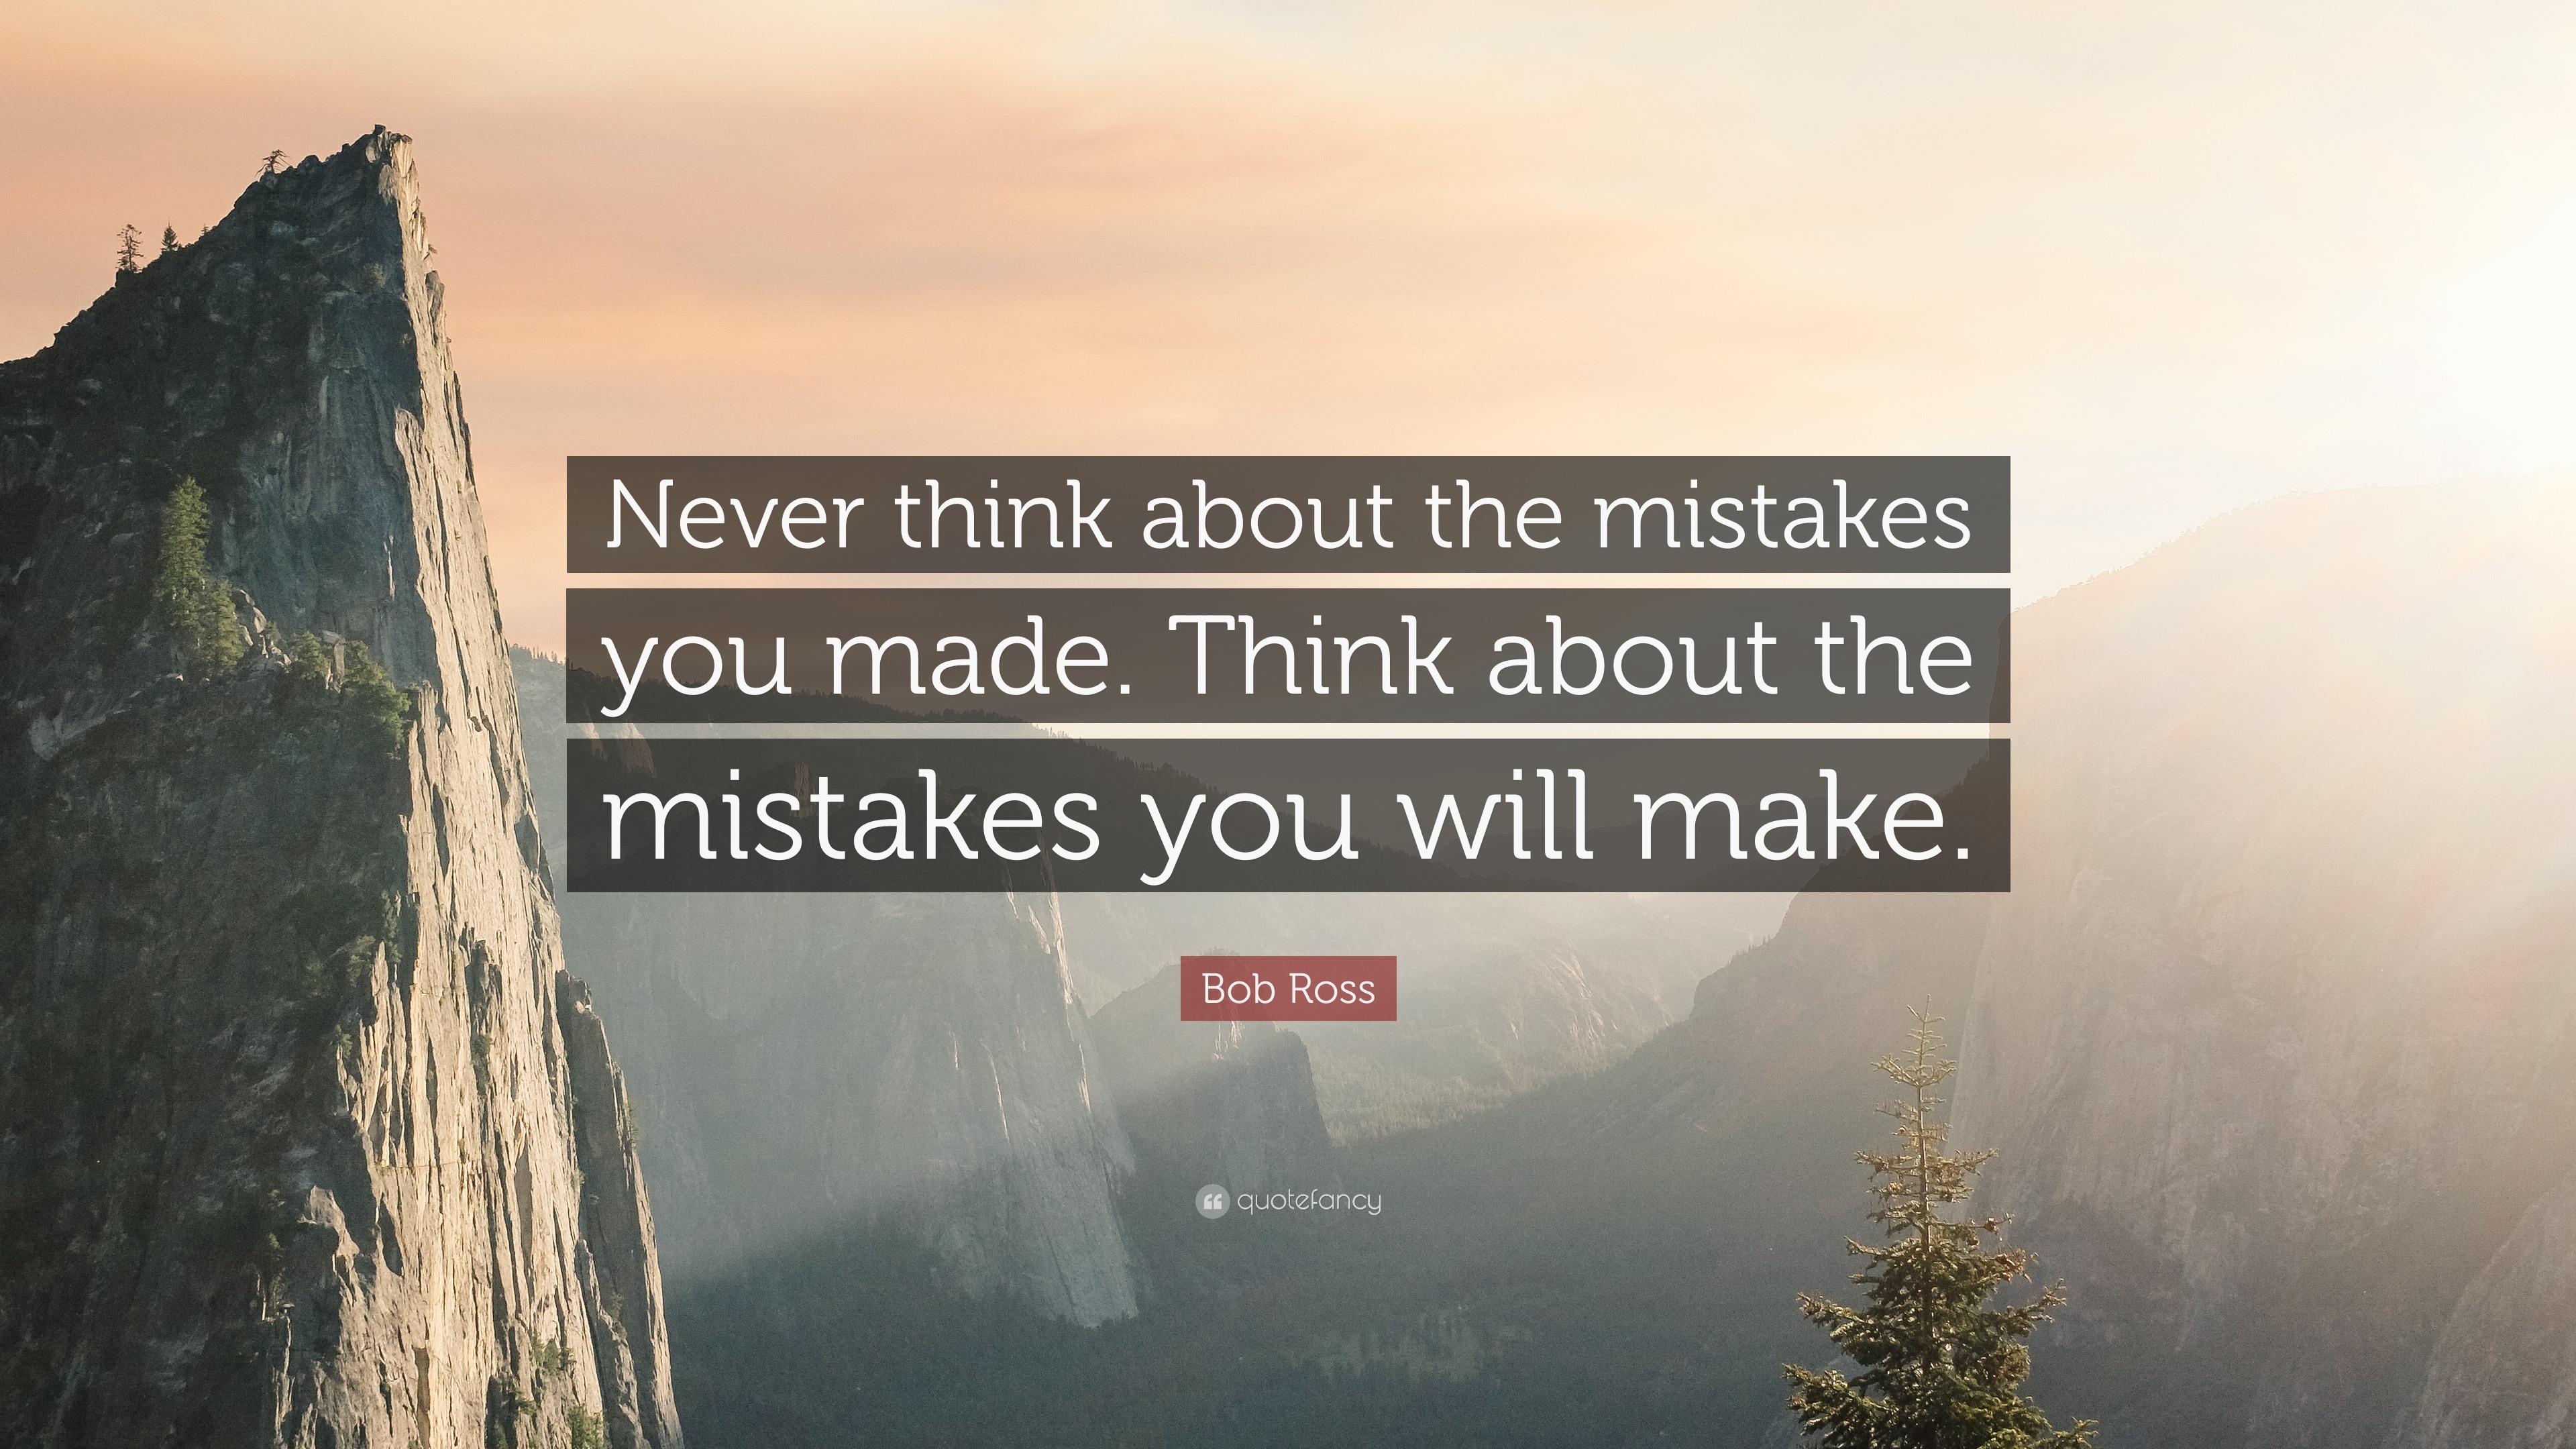 Bob Ross Quote: “Never think about the mistakes you made. Think about